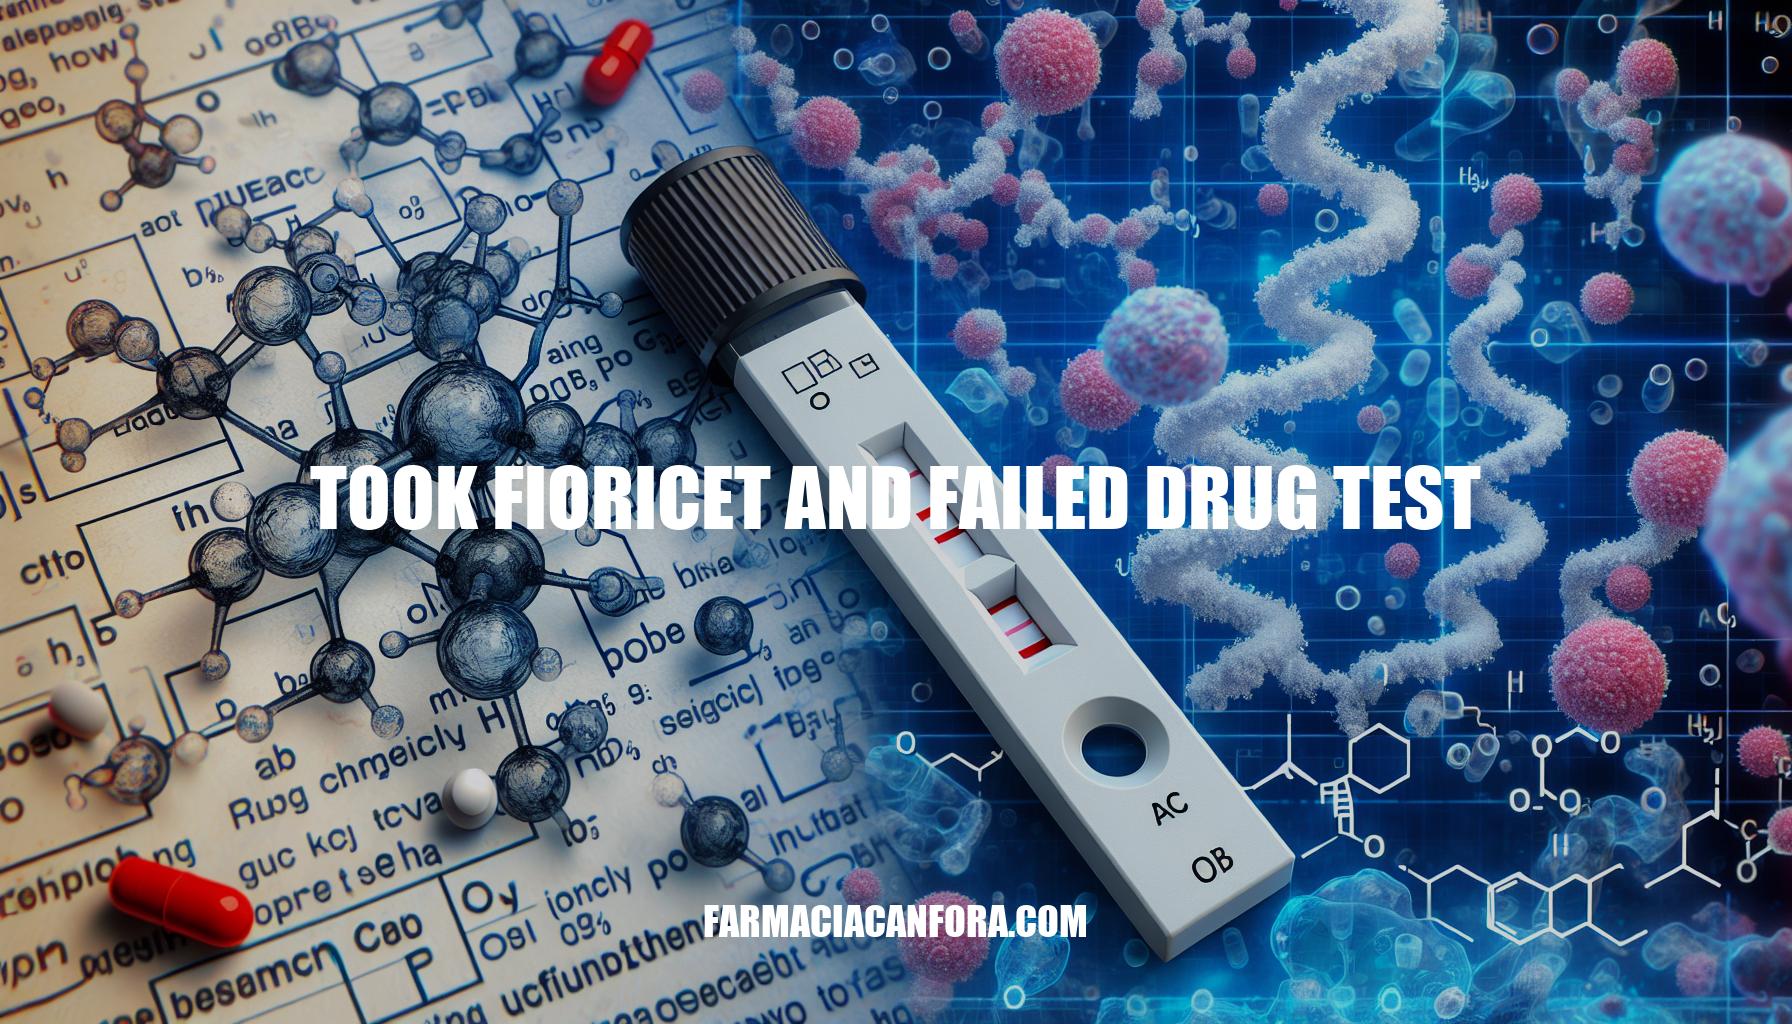 Took Fioricet and Failed Drug Test: Understanding the Connection